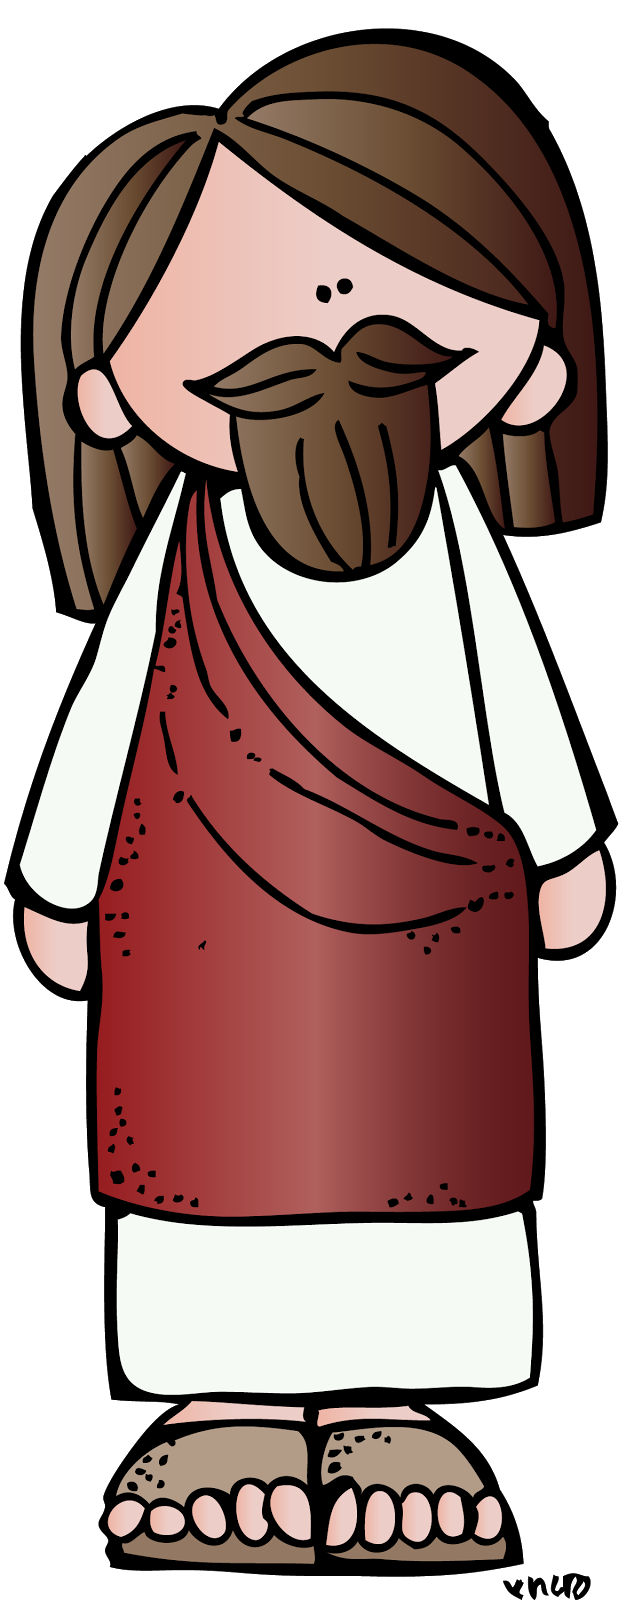 free clipart pictures of jesus christ - photo #45